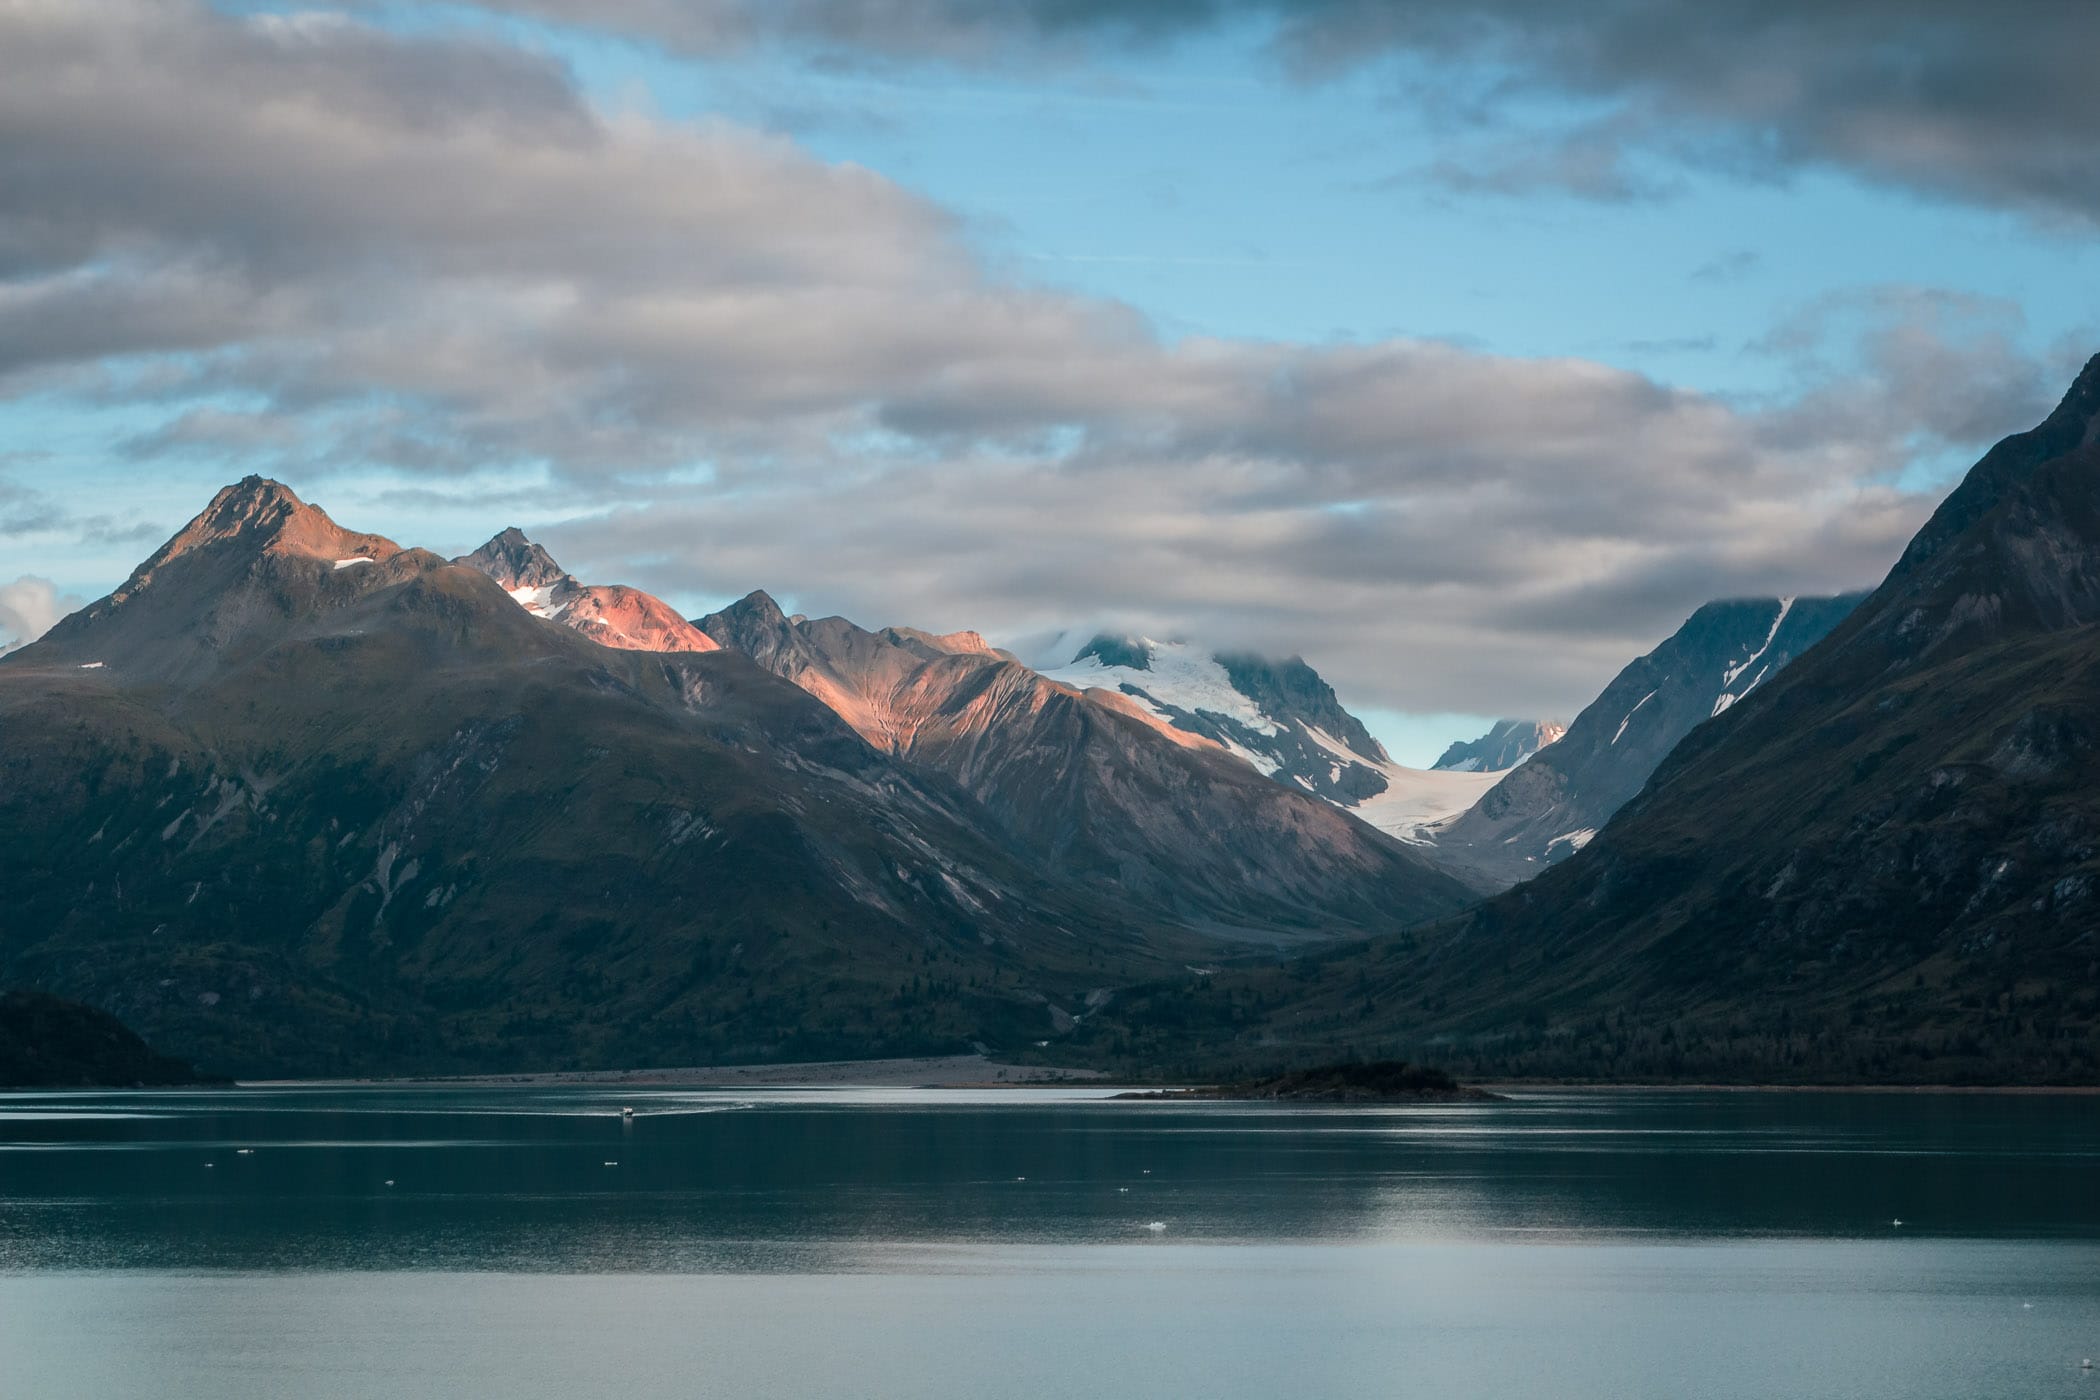 Morning clouds begin to burn off as the late-summer sun warms the mountains of Alaska's Glacier Bay.